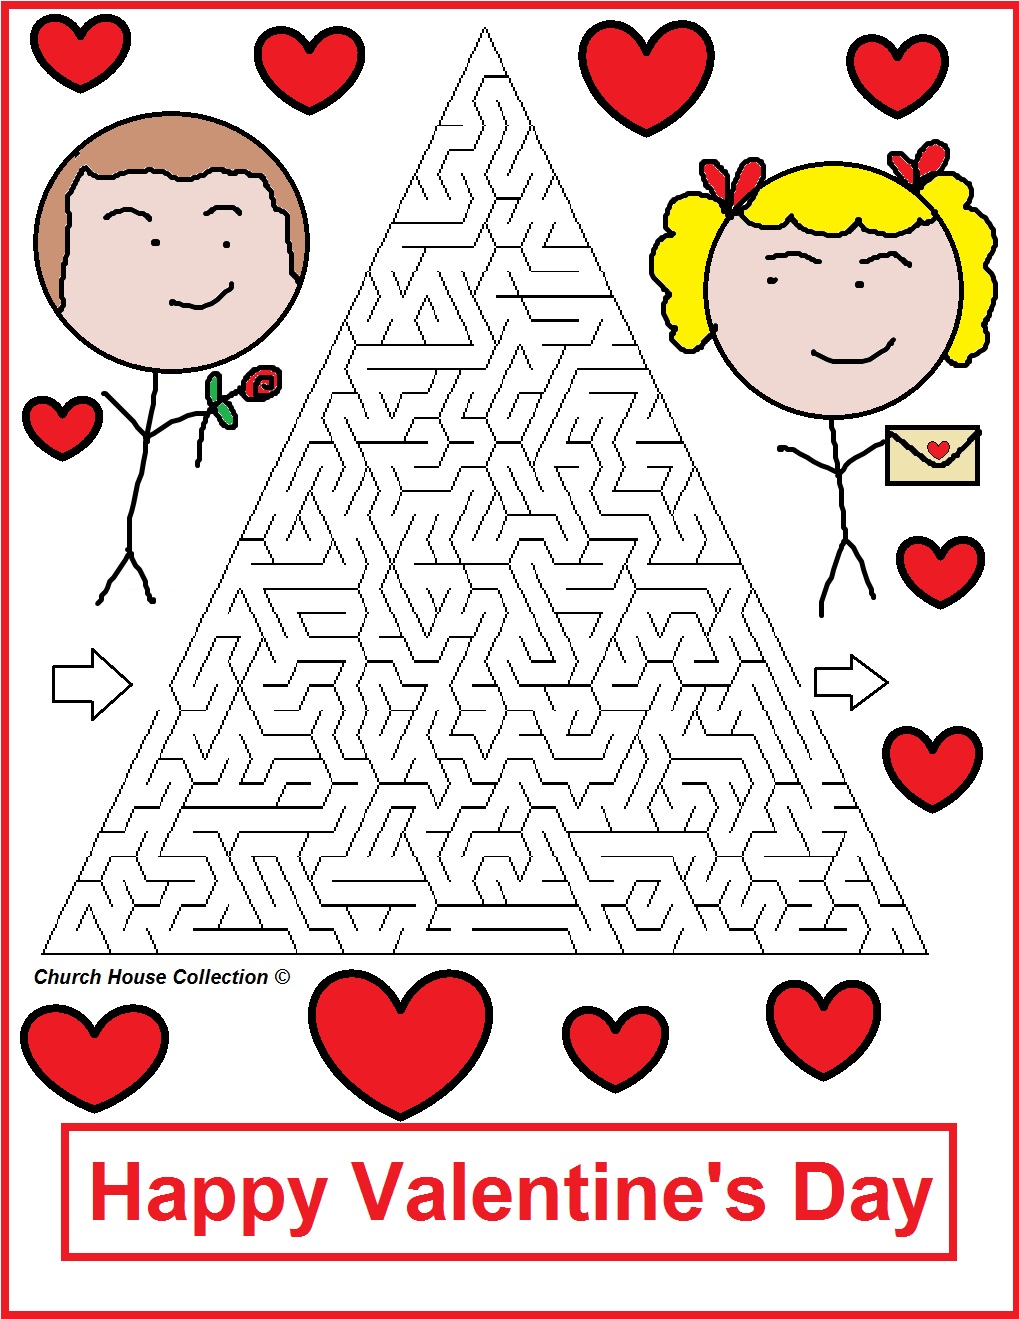 church-house-collection-blog-valentine-s-day-mazes-for-school-teachers